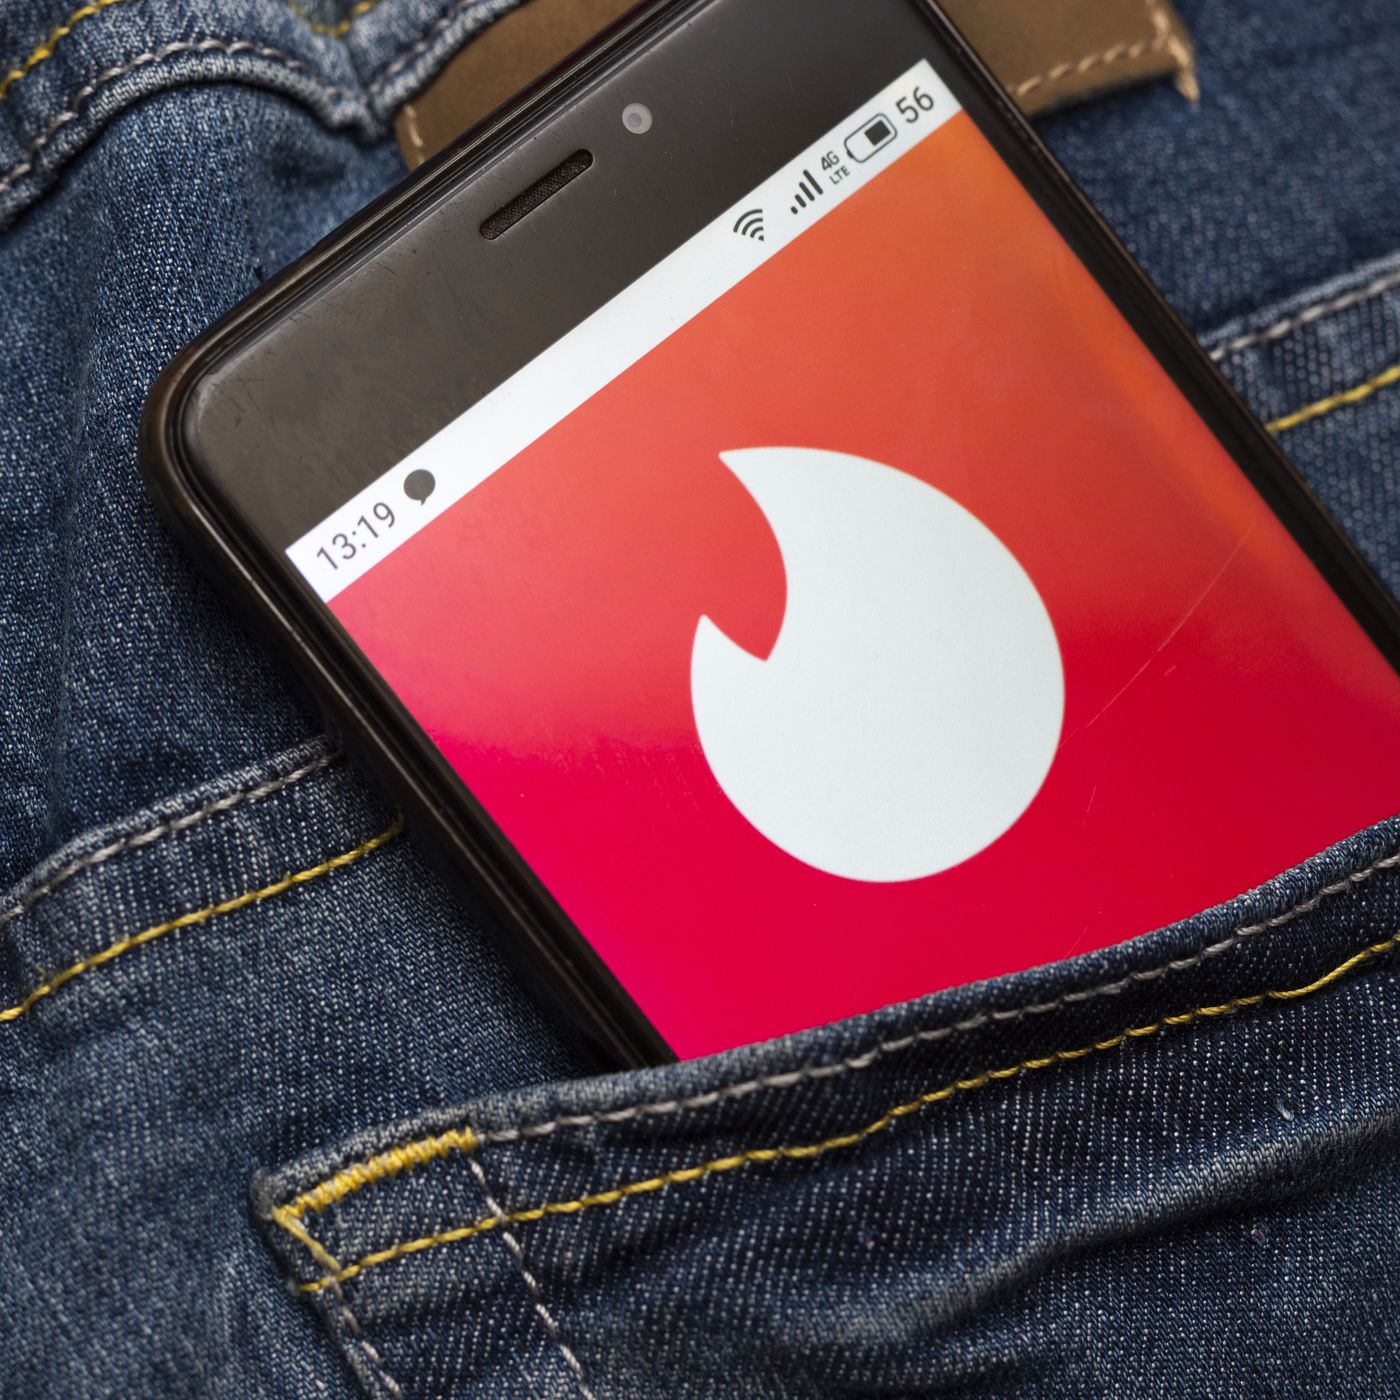 How to see if someone is active on tinder